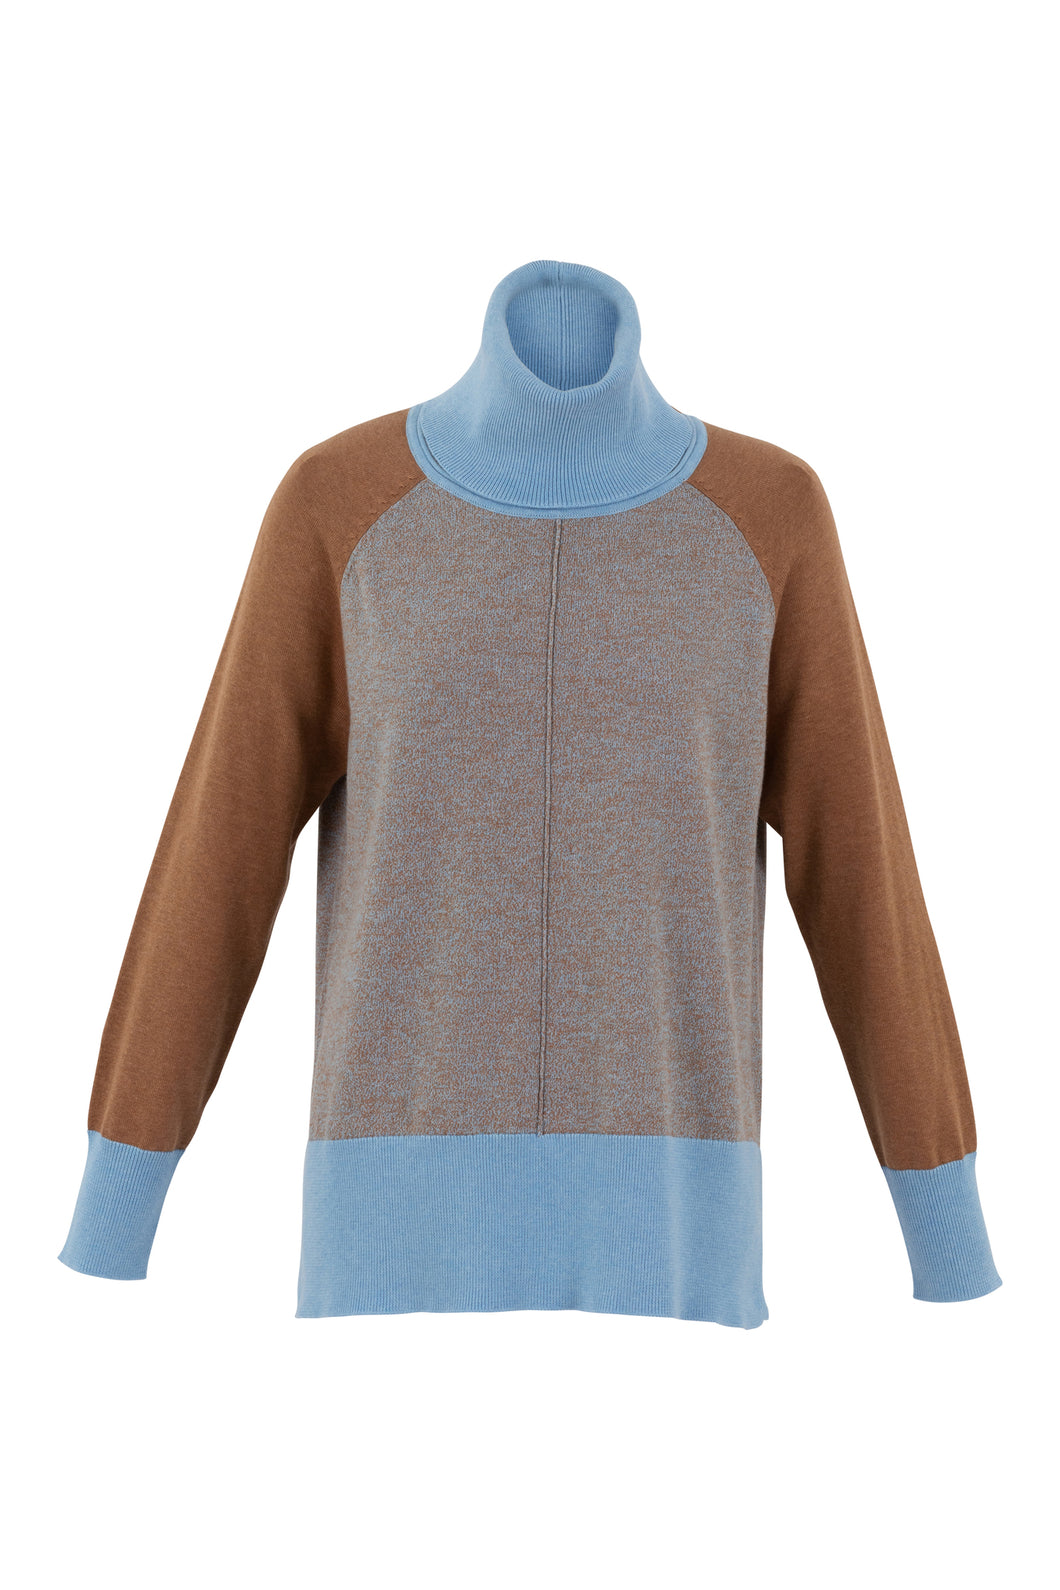 MARBLE FASHIONS 7211 SWEATER WITH SCARF COLOUR 213 - POWDER BLUE